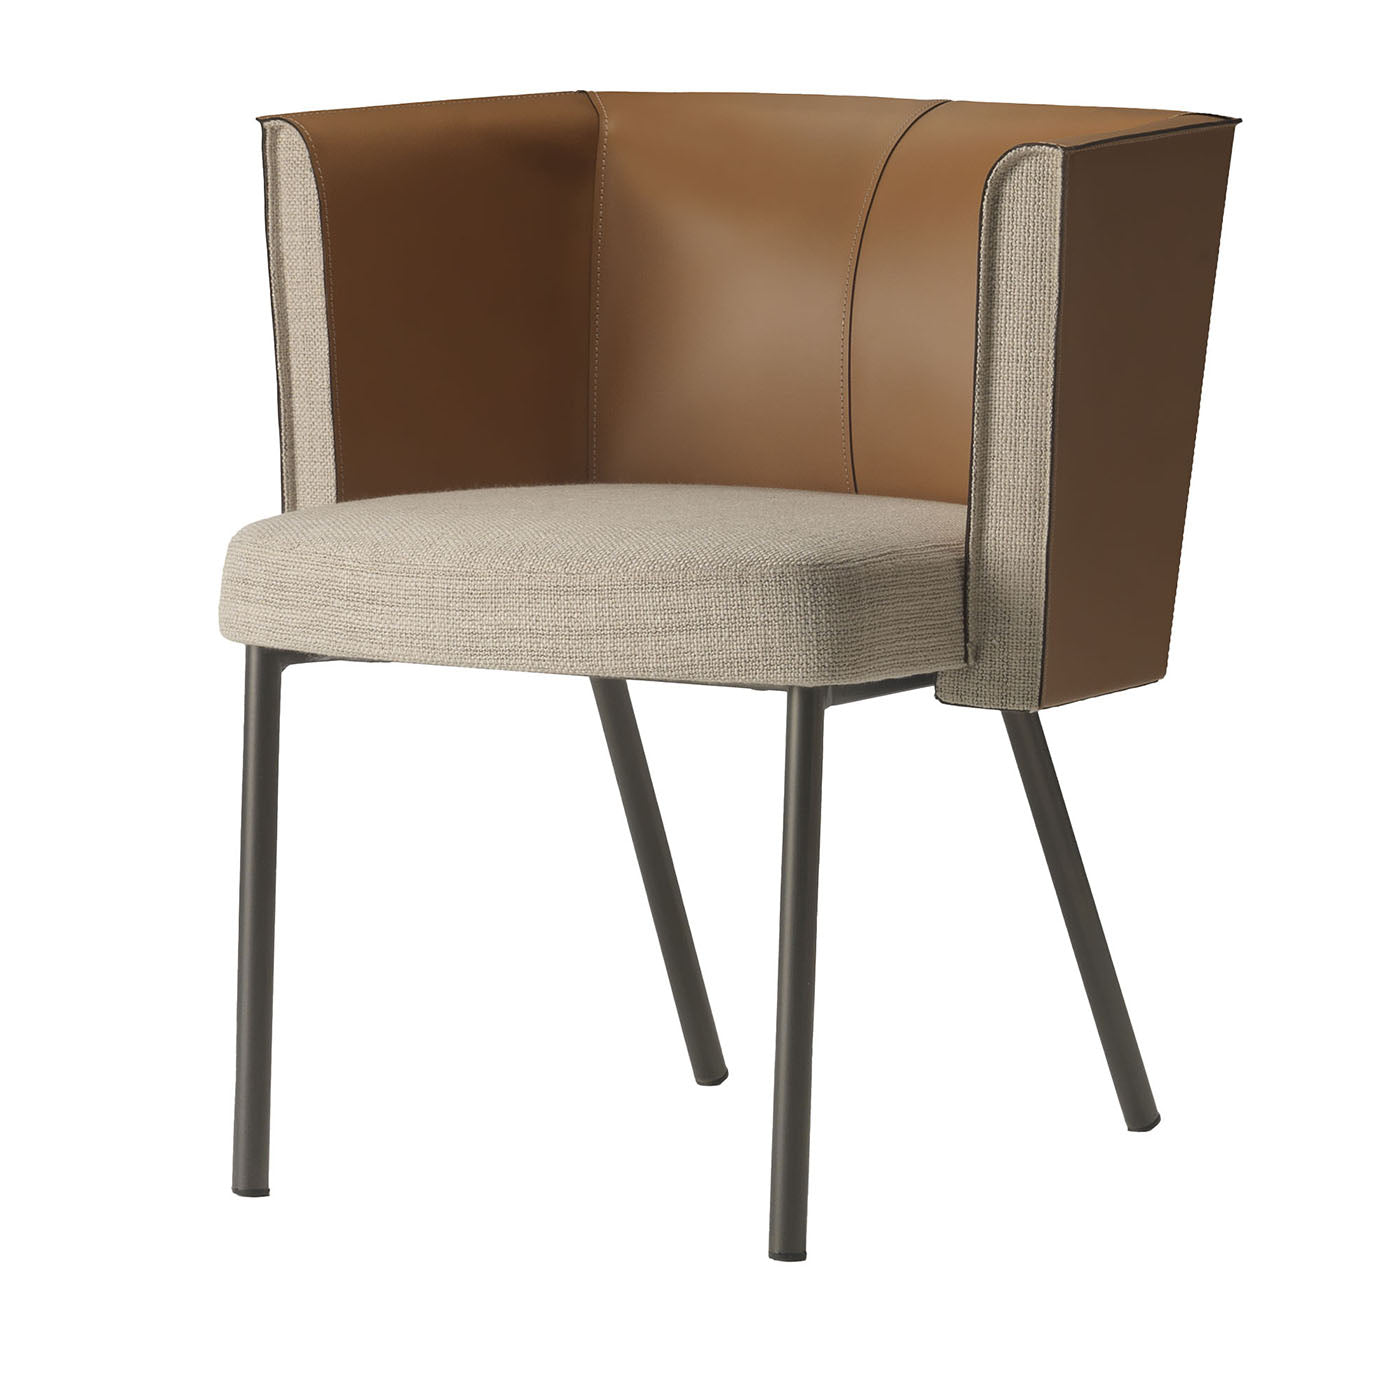 Riviera Leather & Fabric Chair - Main view